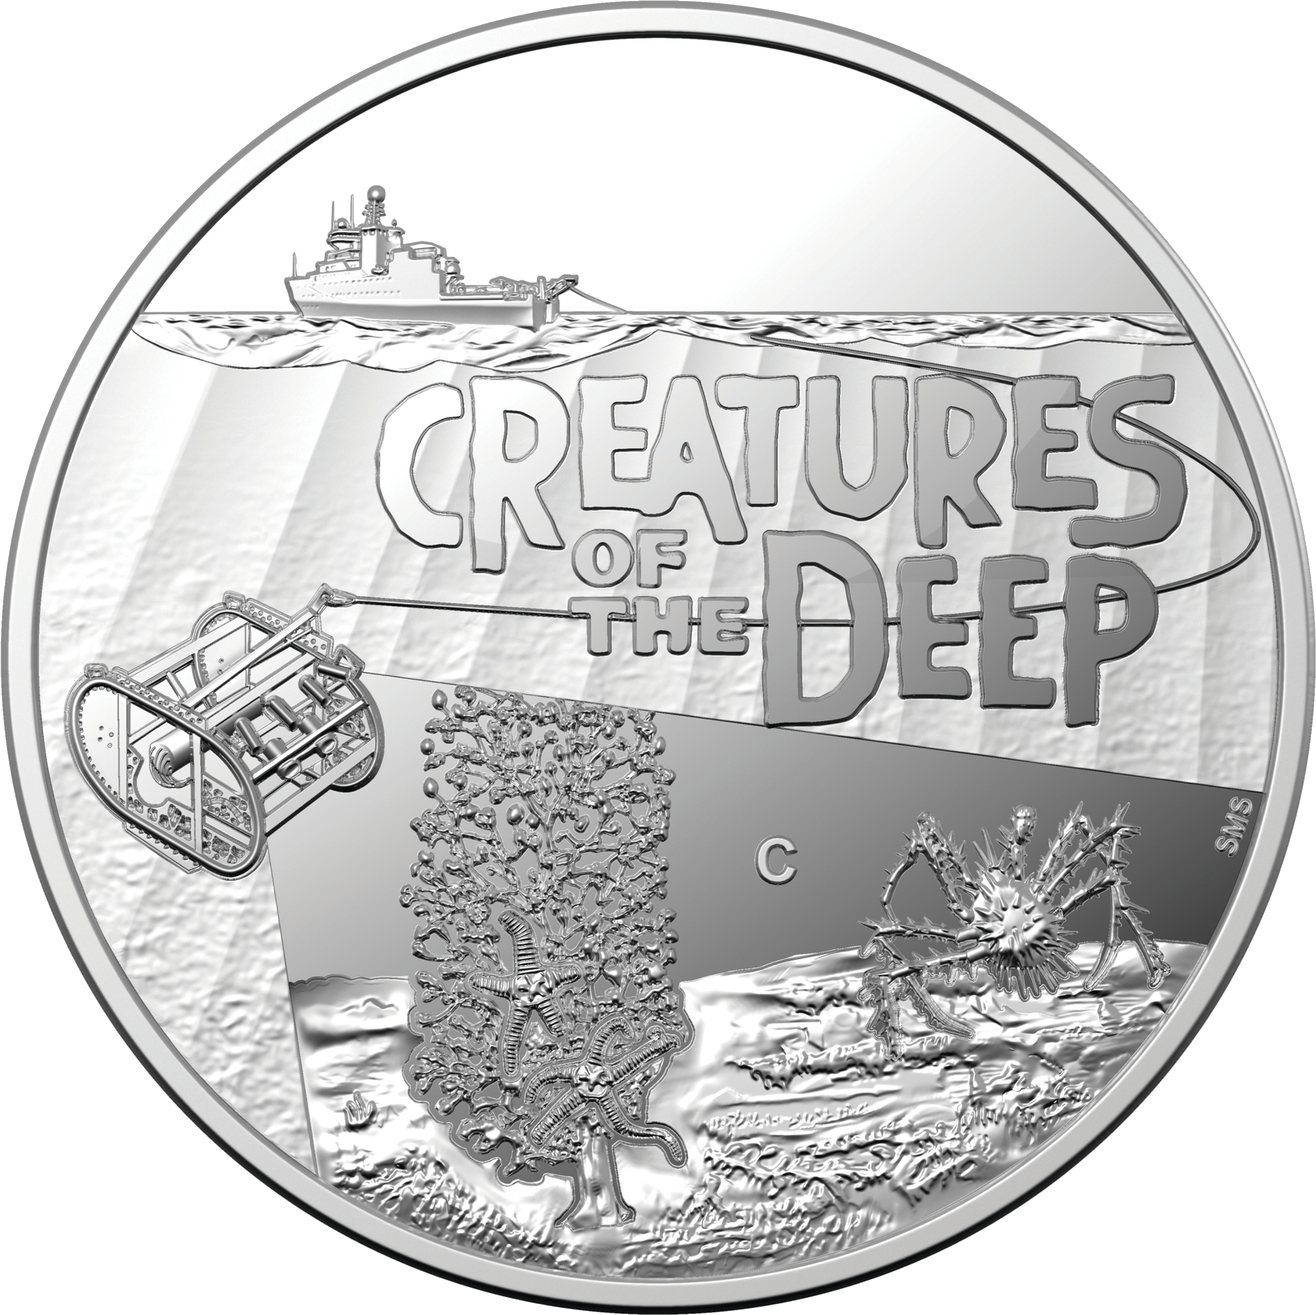 2023 $1 Creatures Of The Deep Fine Silver 'C' Mintmark Proof Coin